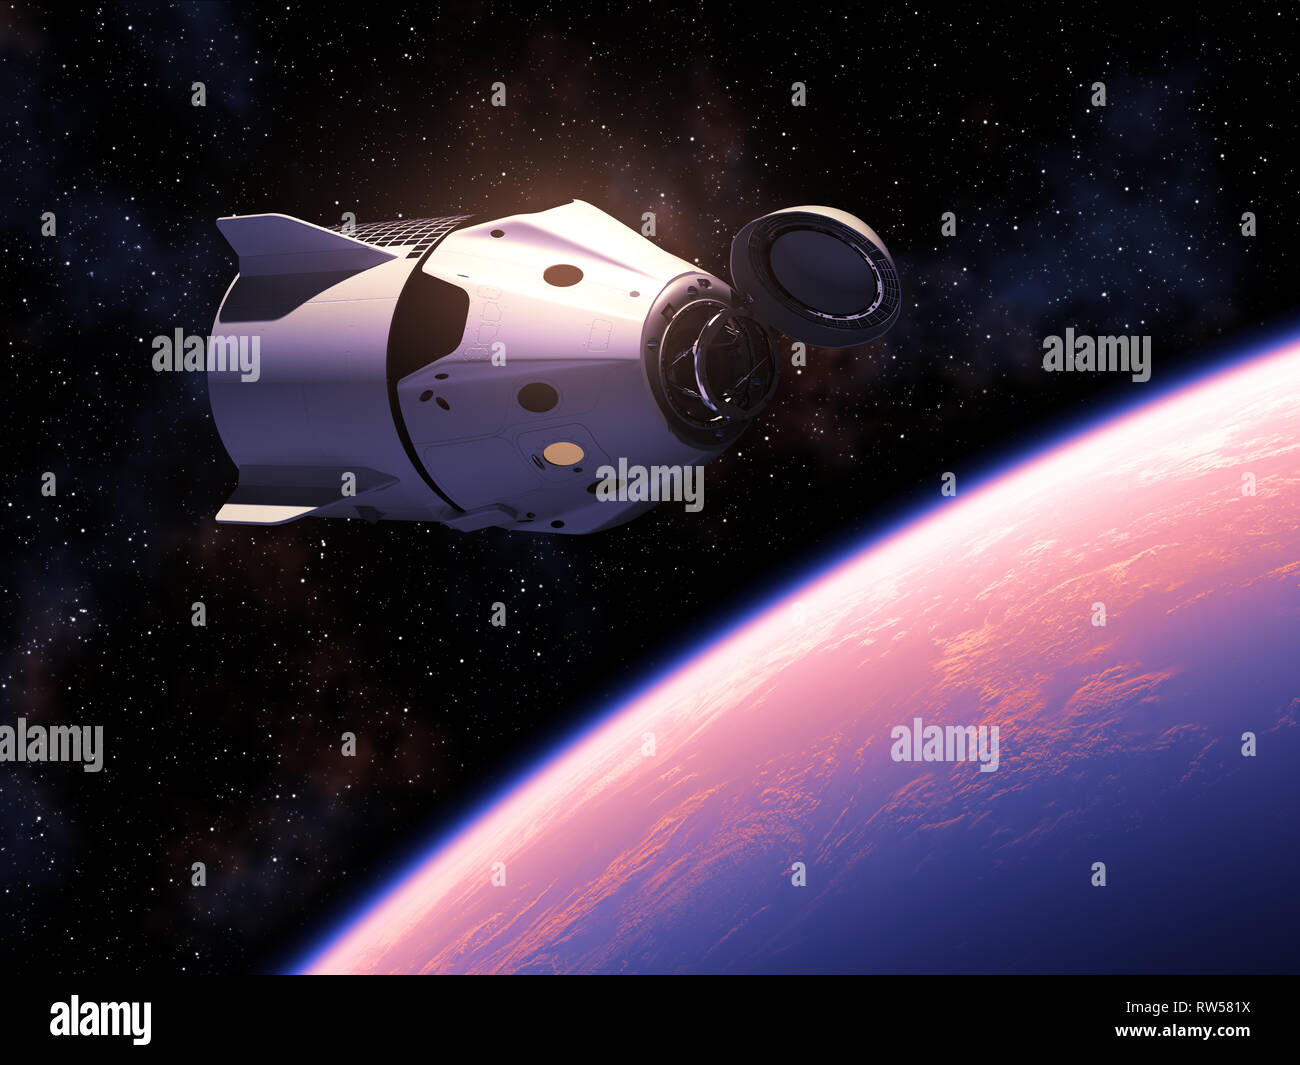 Commercial Spacecraft Orbiting Planet Earth. 3D Illustration. Stock Photo